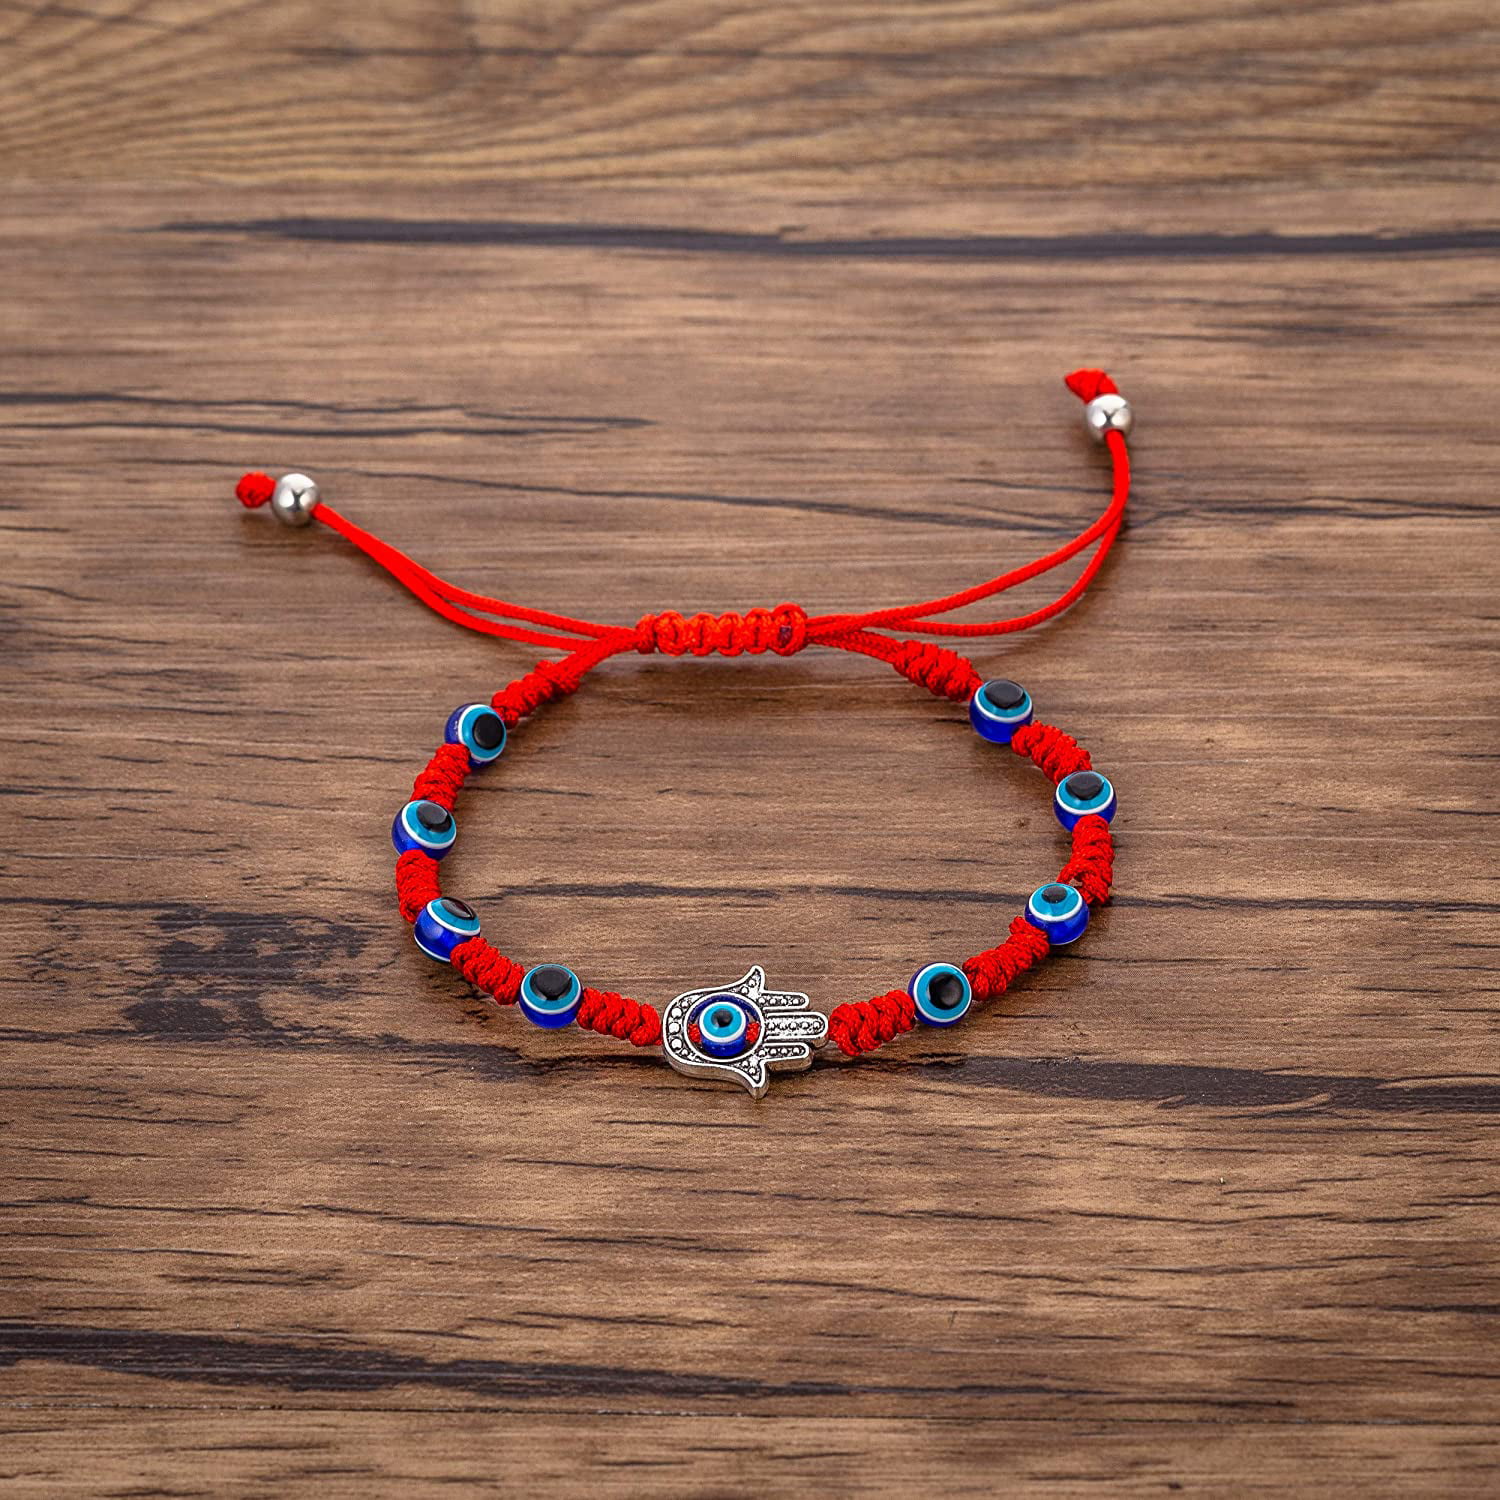 6pcs Evil Eye String Kabbalah Bracelets for Protection and Luck Hand-Woven Red Rope Cord Thread Friendship Bracelet Anklet 